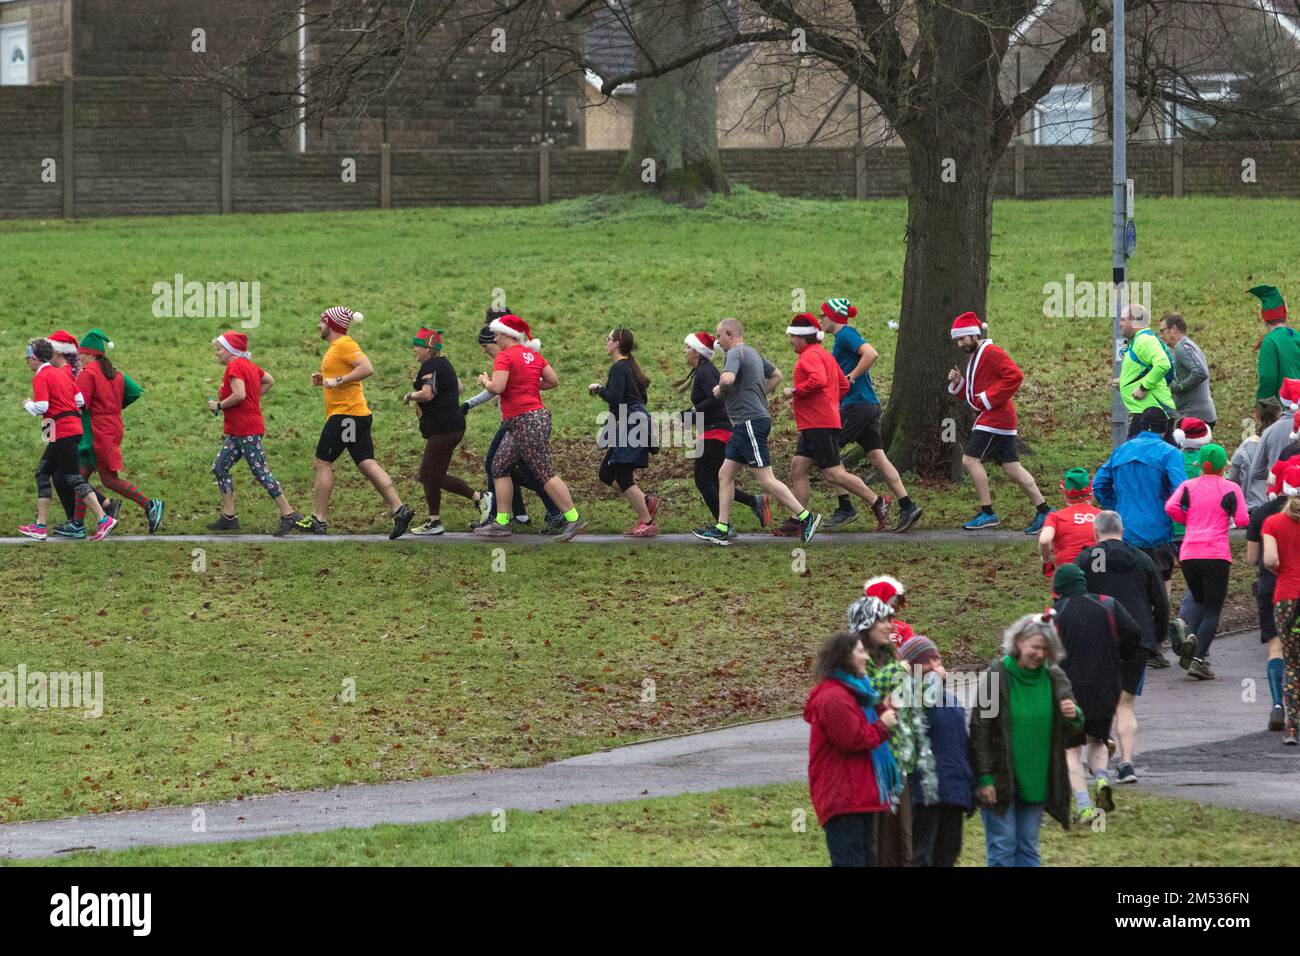 Chippenham, Wiltshire, UK. 25th December, 2022. Runners are pictured as they take part in an early morning Christmas day 5km park run in Monkton Park, Chippenham, Wiltshire. The wet weather did nothing to dampen the spirits of the 200-300 people who participated in the event with many of them dressing up in fancy dress. Credit: Lynchpics/Alamy Live News Stock Photo